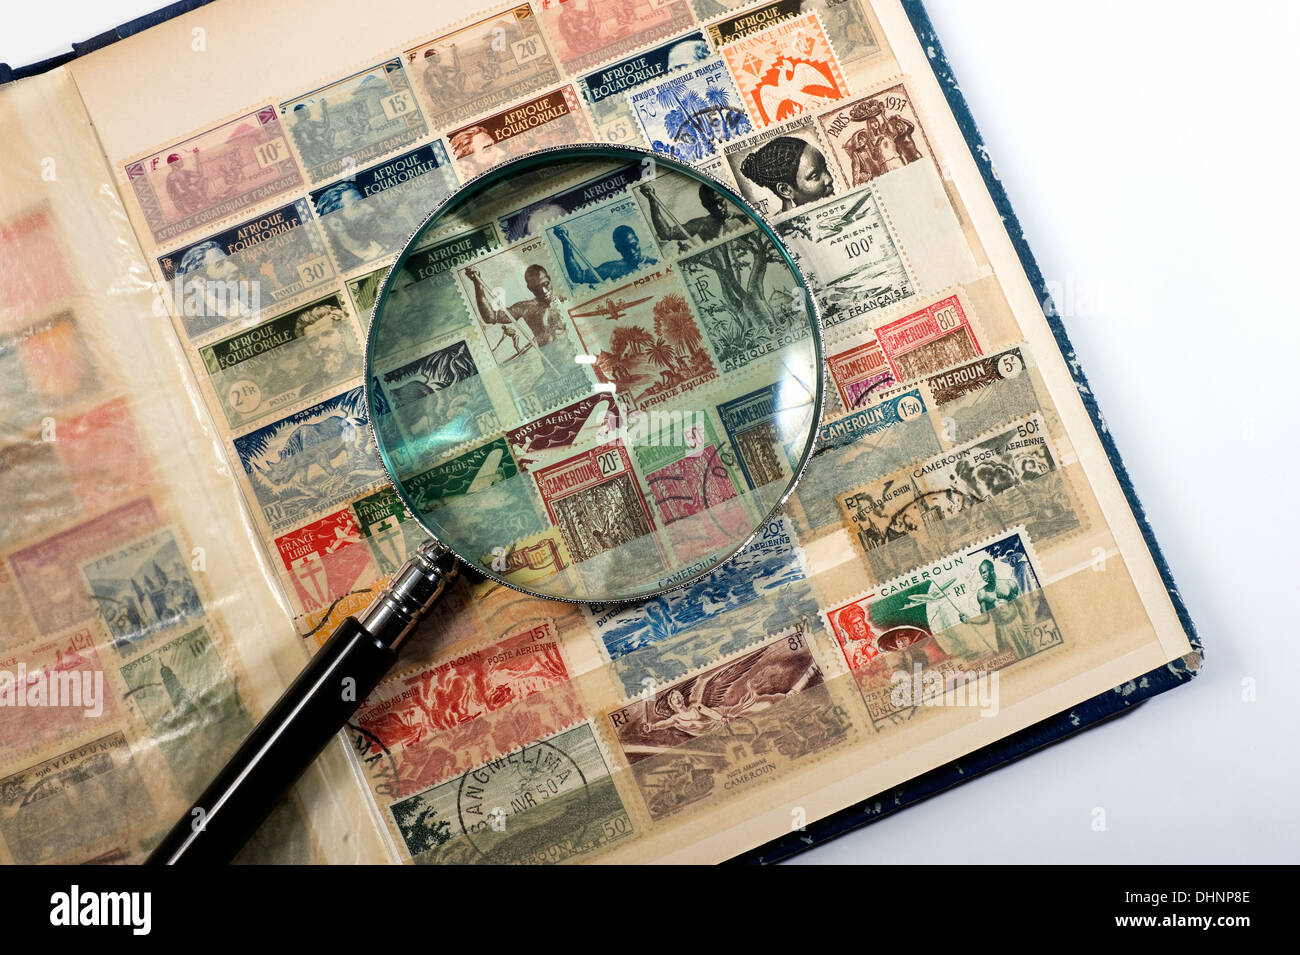 Postage stamp collection album with a magnifying glass on it Stock Photo